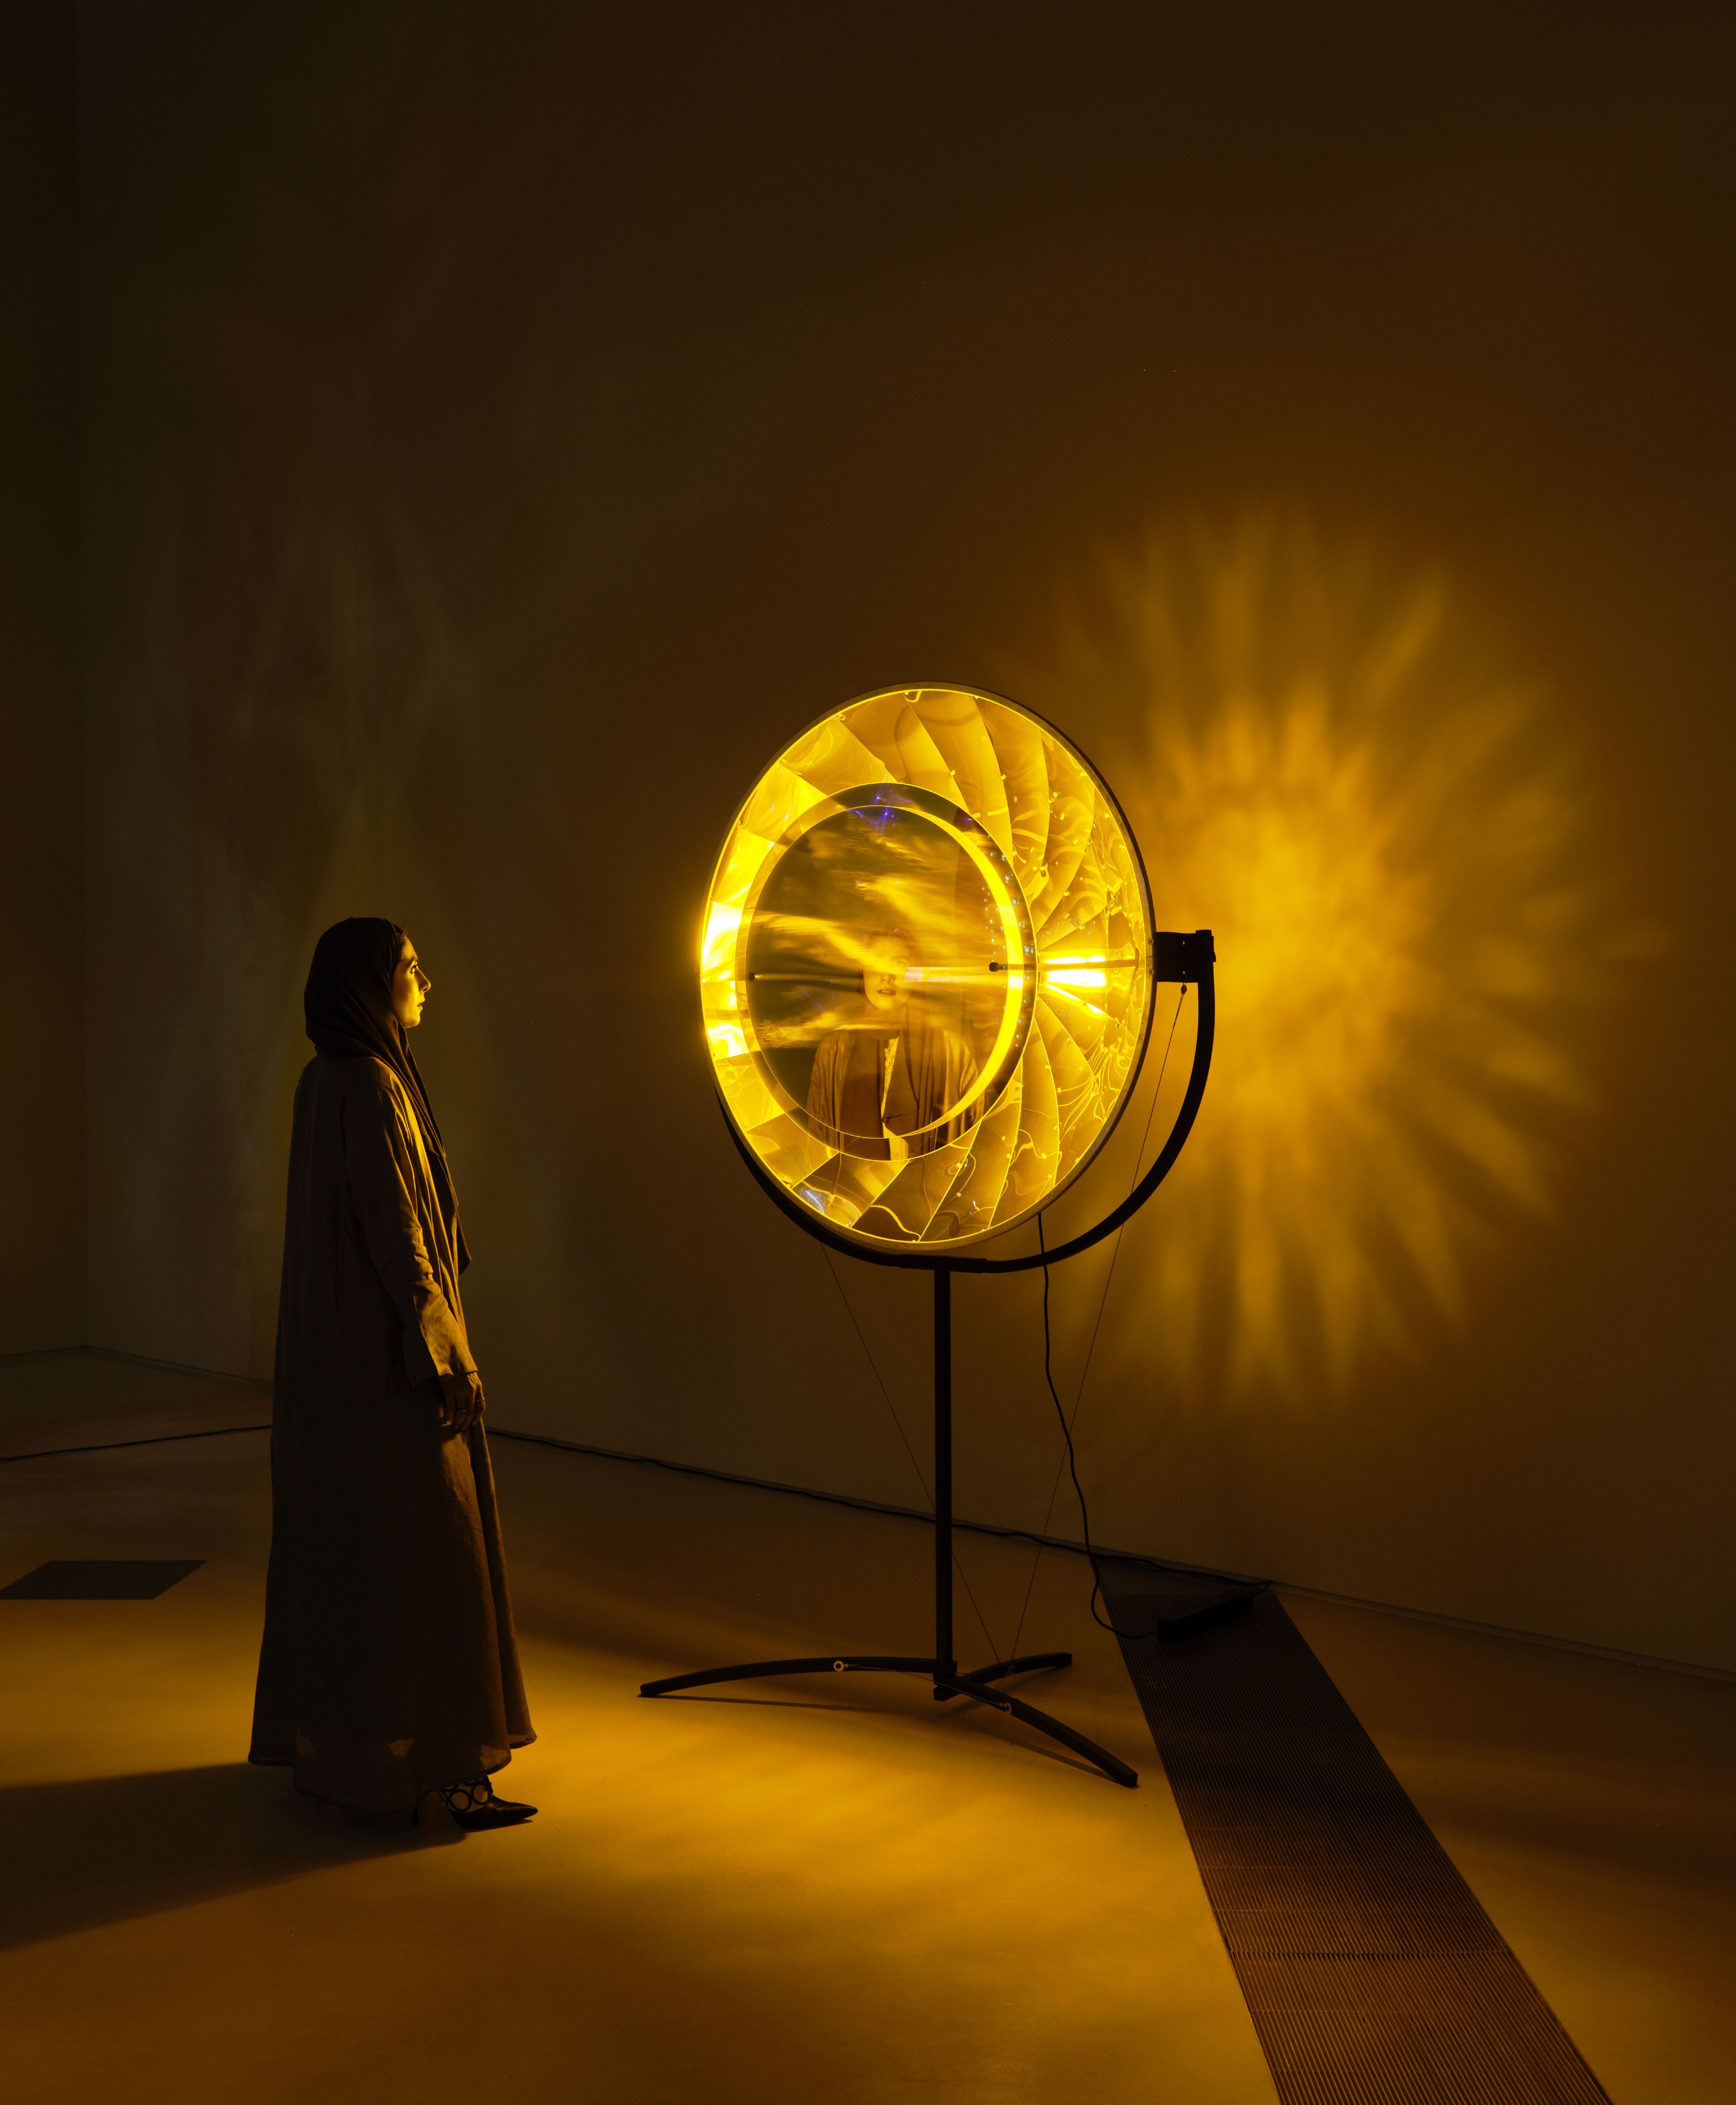 A woman in a scarf stares at a large transparent, circular stone, set on metal legs, illuminated by yellow light.